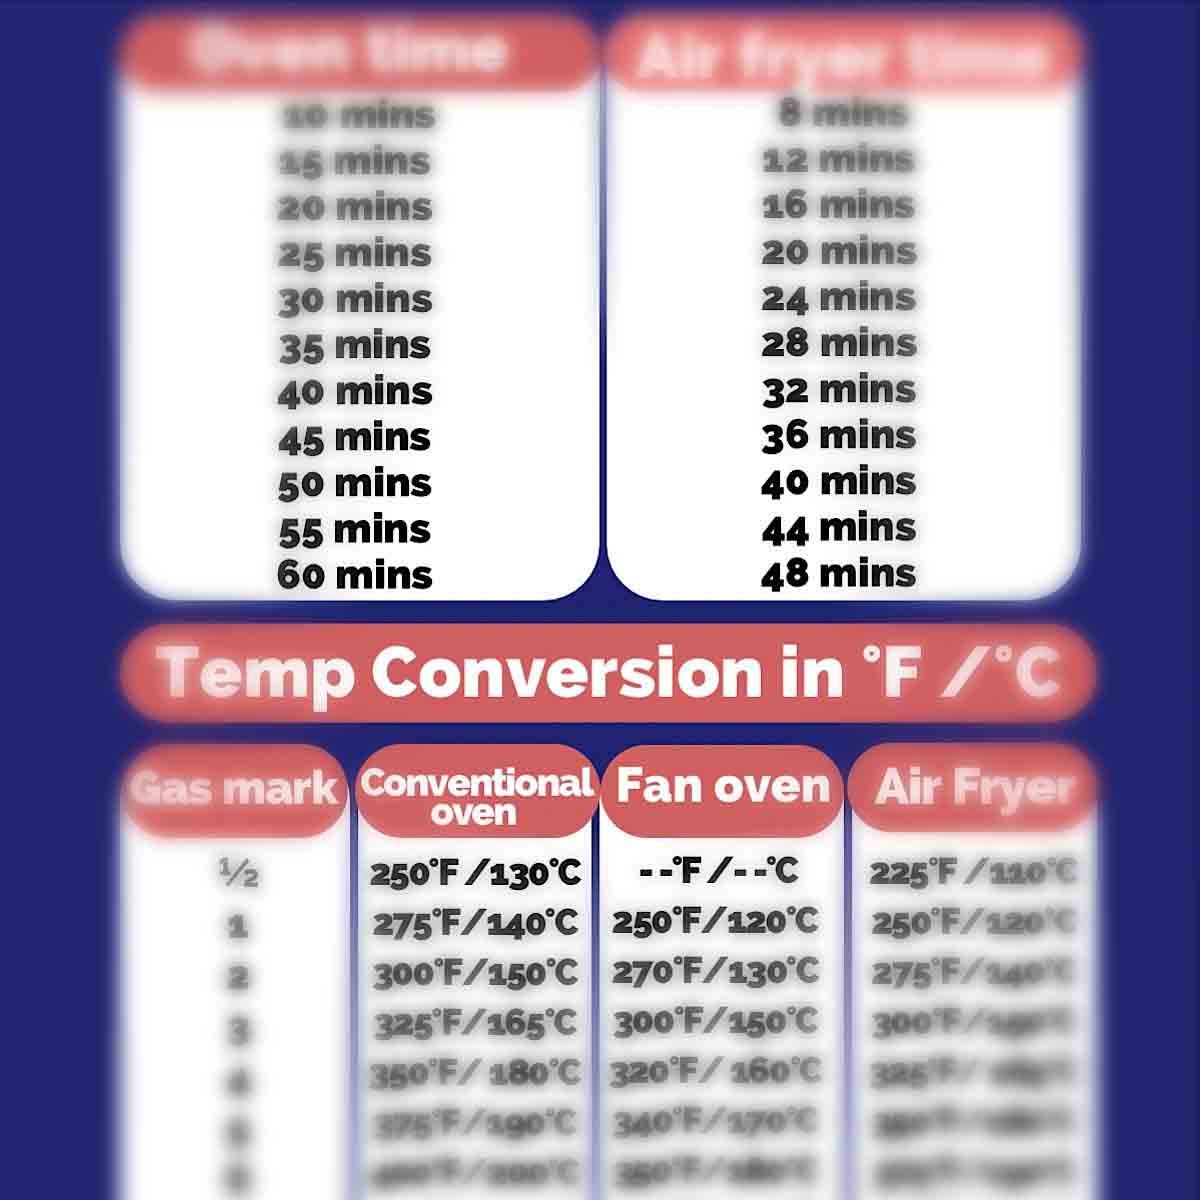 conversion chart for conventional oven to air fryer